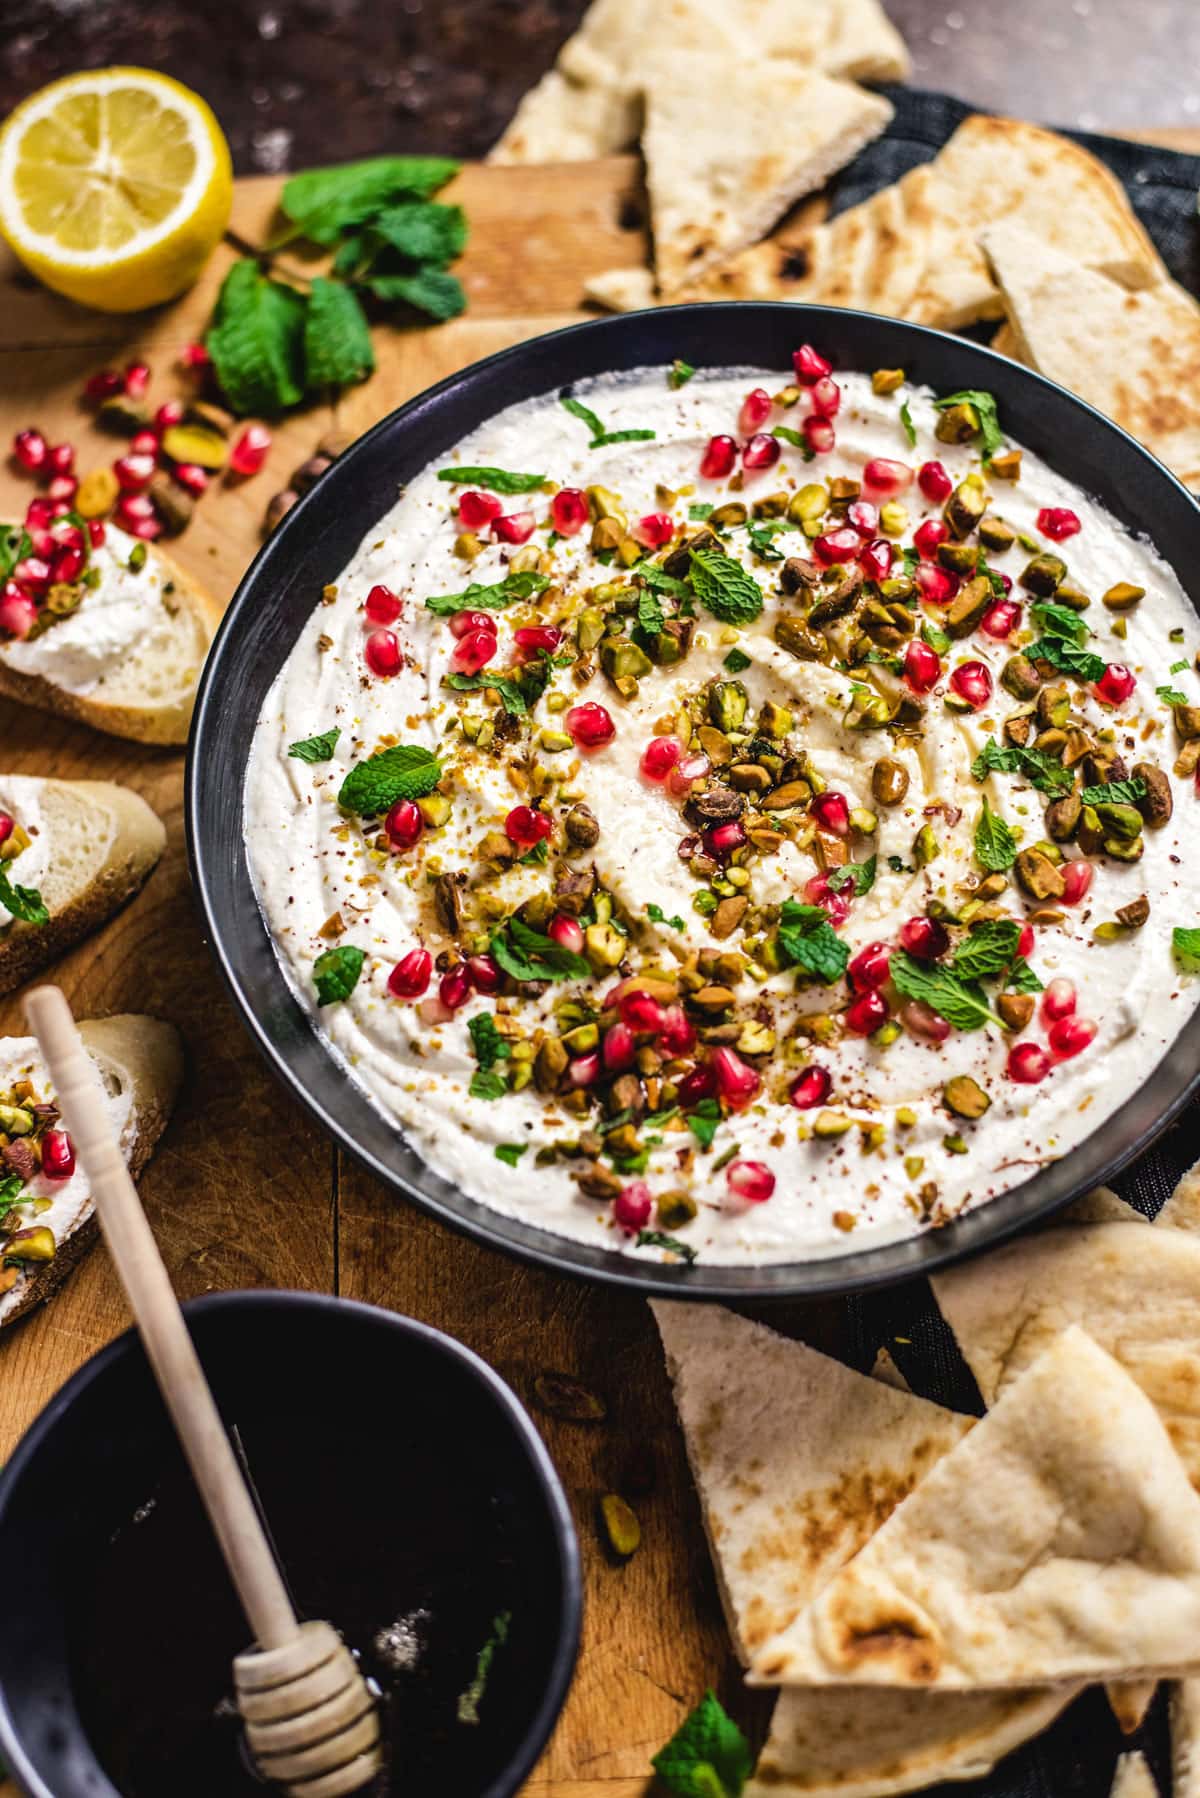 A close-up picture of Honey-Whipped Feta Dip in a black bowl, surrounded by pita triangles and slices of crusty bread. There is a black small bowl of honey in the corner as well as a lemon, mint, and pomegranate seeds scattered about.